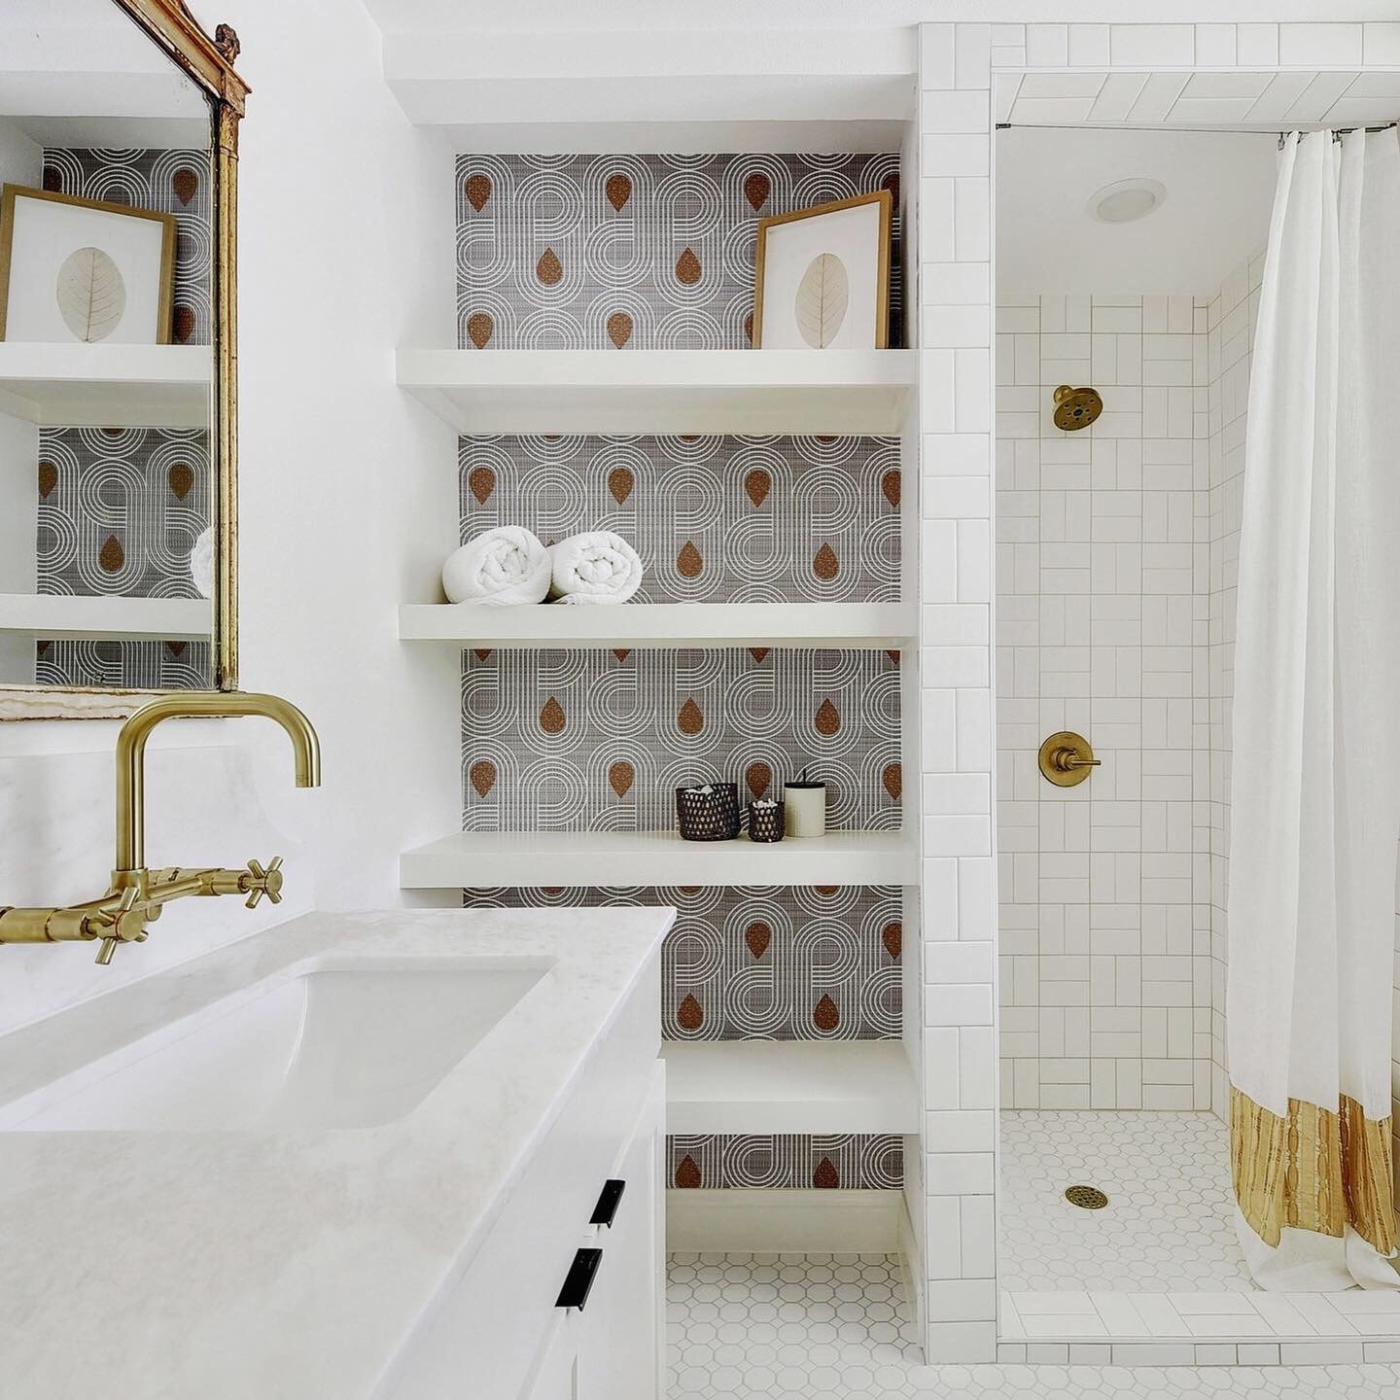 A white bathroom with round white floor tiles and square white bathroom tile has built-in shelves with white round geometric wavy shapes looping in circles on a black background. Small bronze tear drops are in the center of some of the wavy shapes.